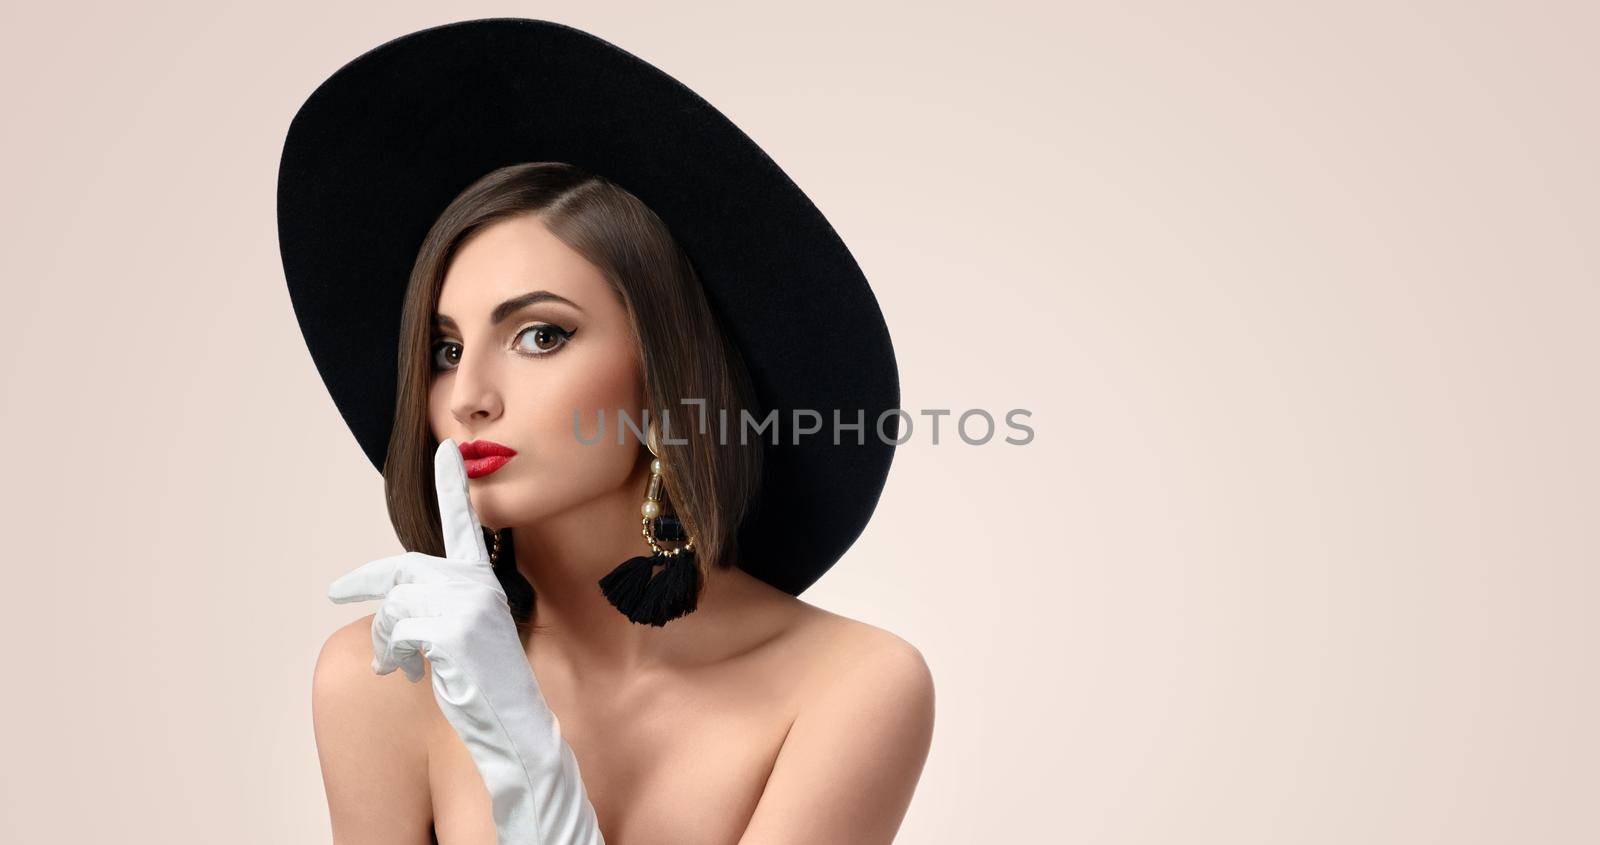 Horizontal studio portrait of a beautiful fashion model wearing a hat and gloves making shushing gesture to the camera copyspace beauty cosmetology skincare secrecy silence concept .